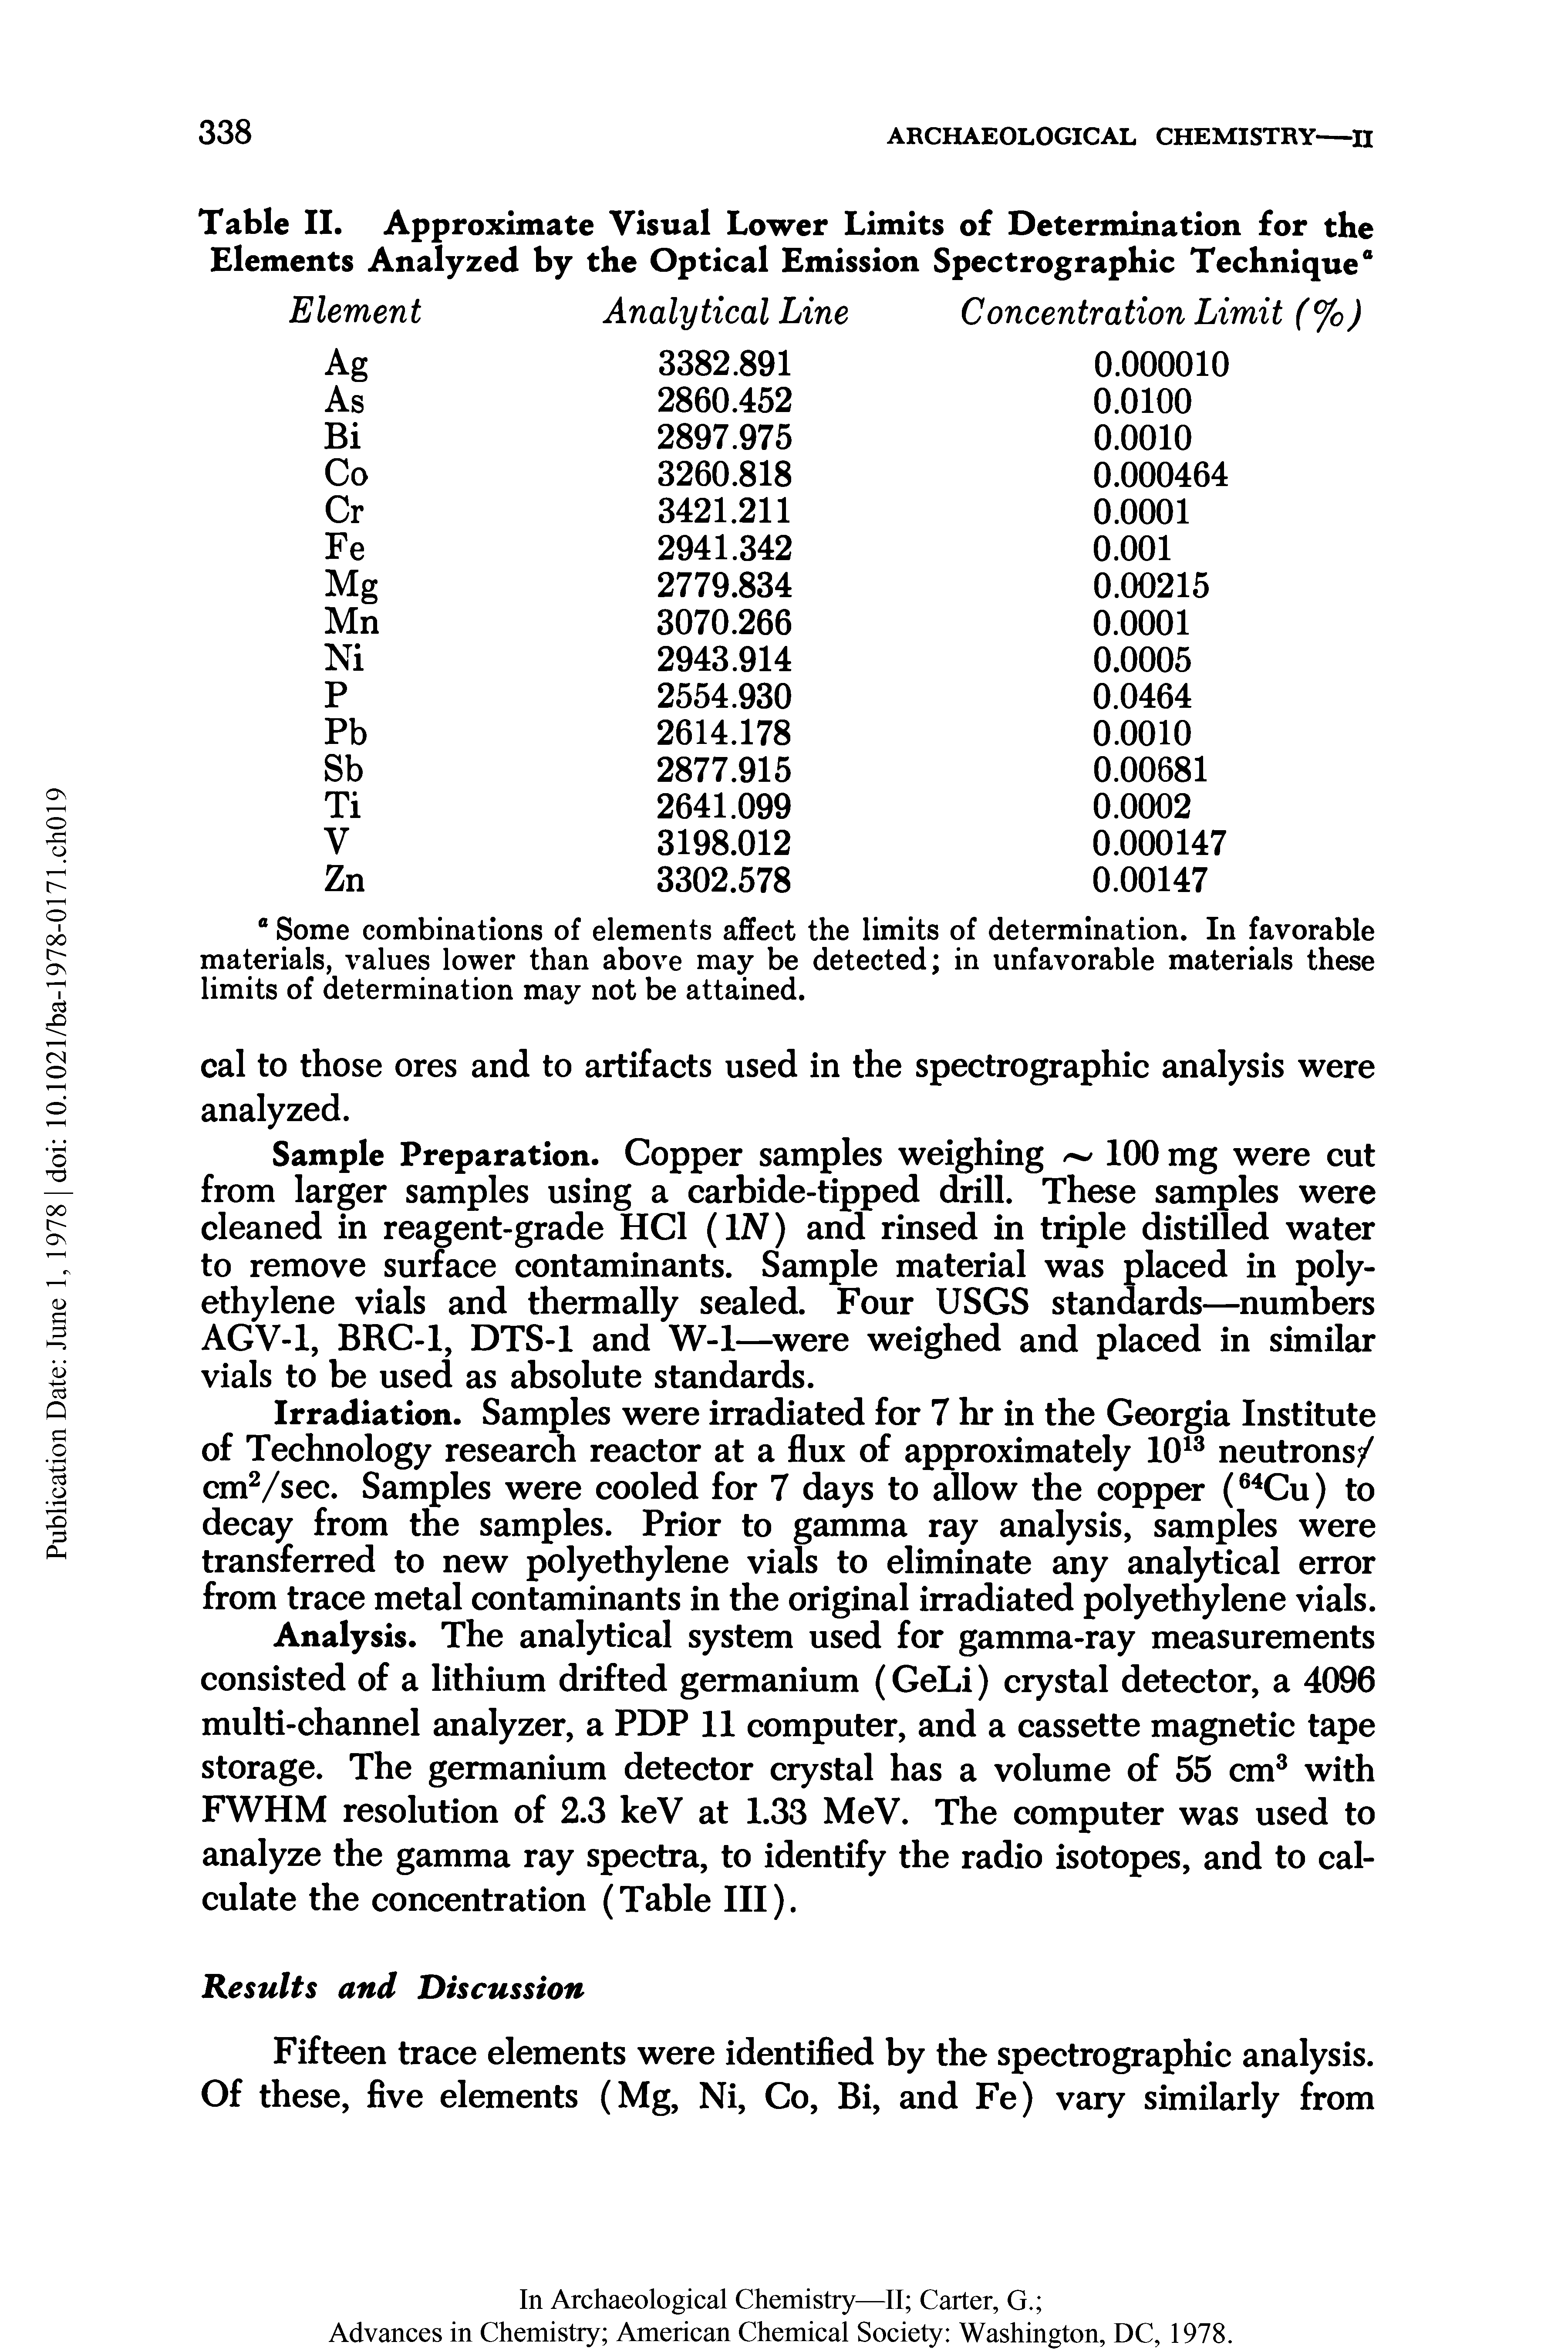 Table II. Approximate Visual Lower Limits of Determination for the Elements Analyzed by the Optical Emission Spectrographic Technique ...